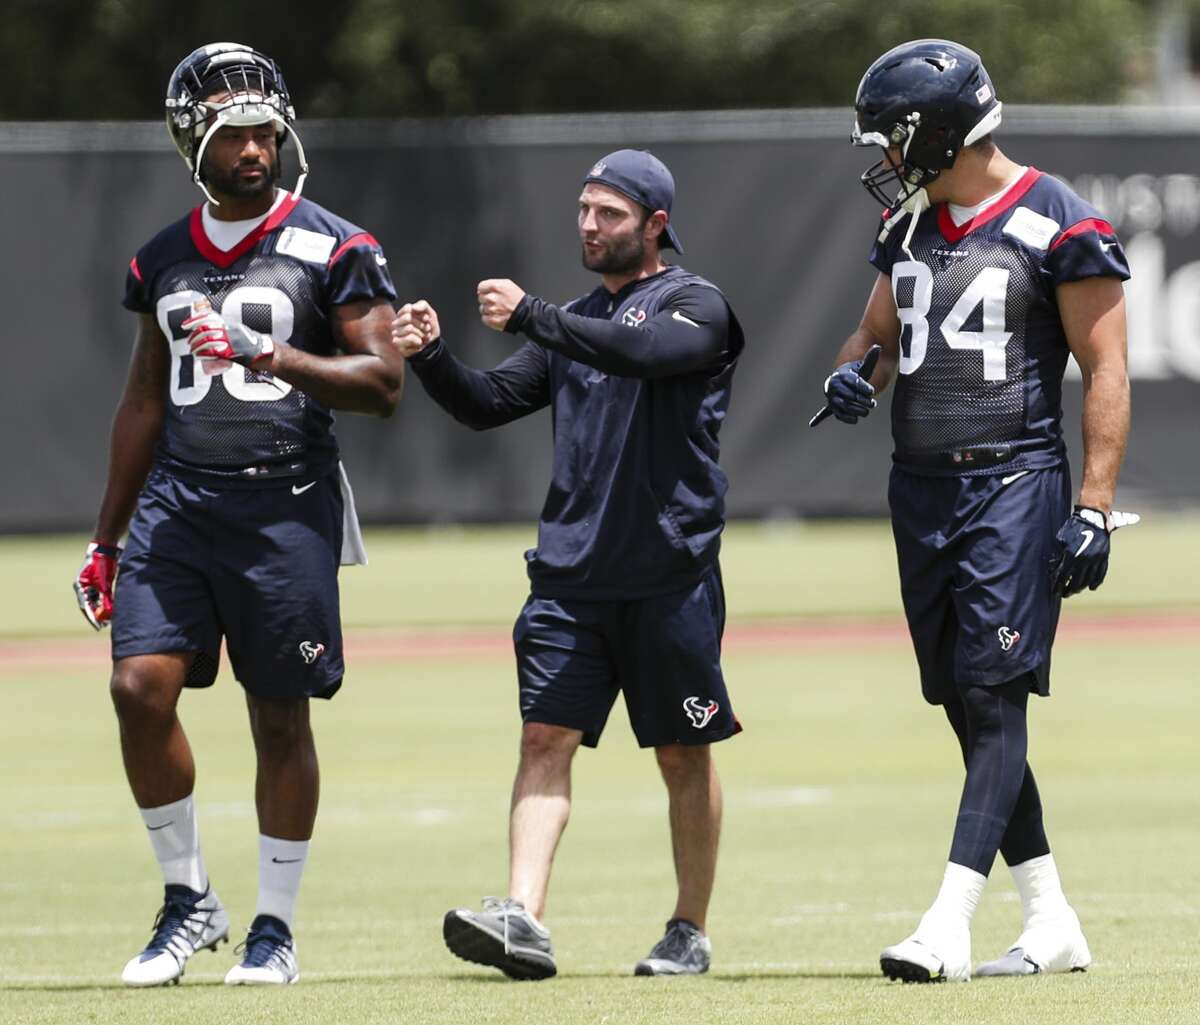 PHOTOS: Memes that summarize the seasons for Texans, Cowboys fans  Houston Texans special teams assistant Wes Welker, center, works with tight ends Jordan Akins (88) and Ryan Griffin (84) during mini camp at The Methodist Training Center on Wednesday, June 13, 2018, in Houston. ( Brett Coomer / Houston Chronicle ) >>>Browse through the slideshow for a recap of the 2018-19 seasons for the Houston Texans and Dallas Cowboys with nothing but memes ... 